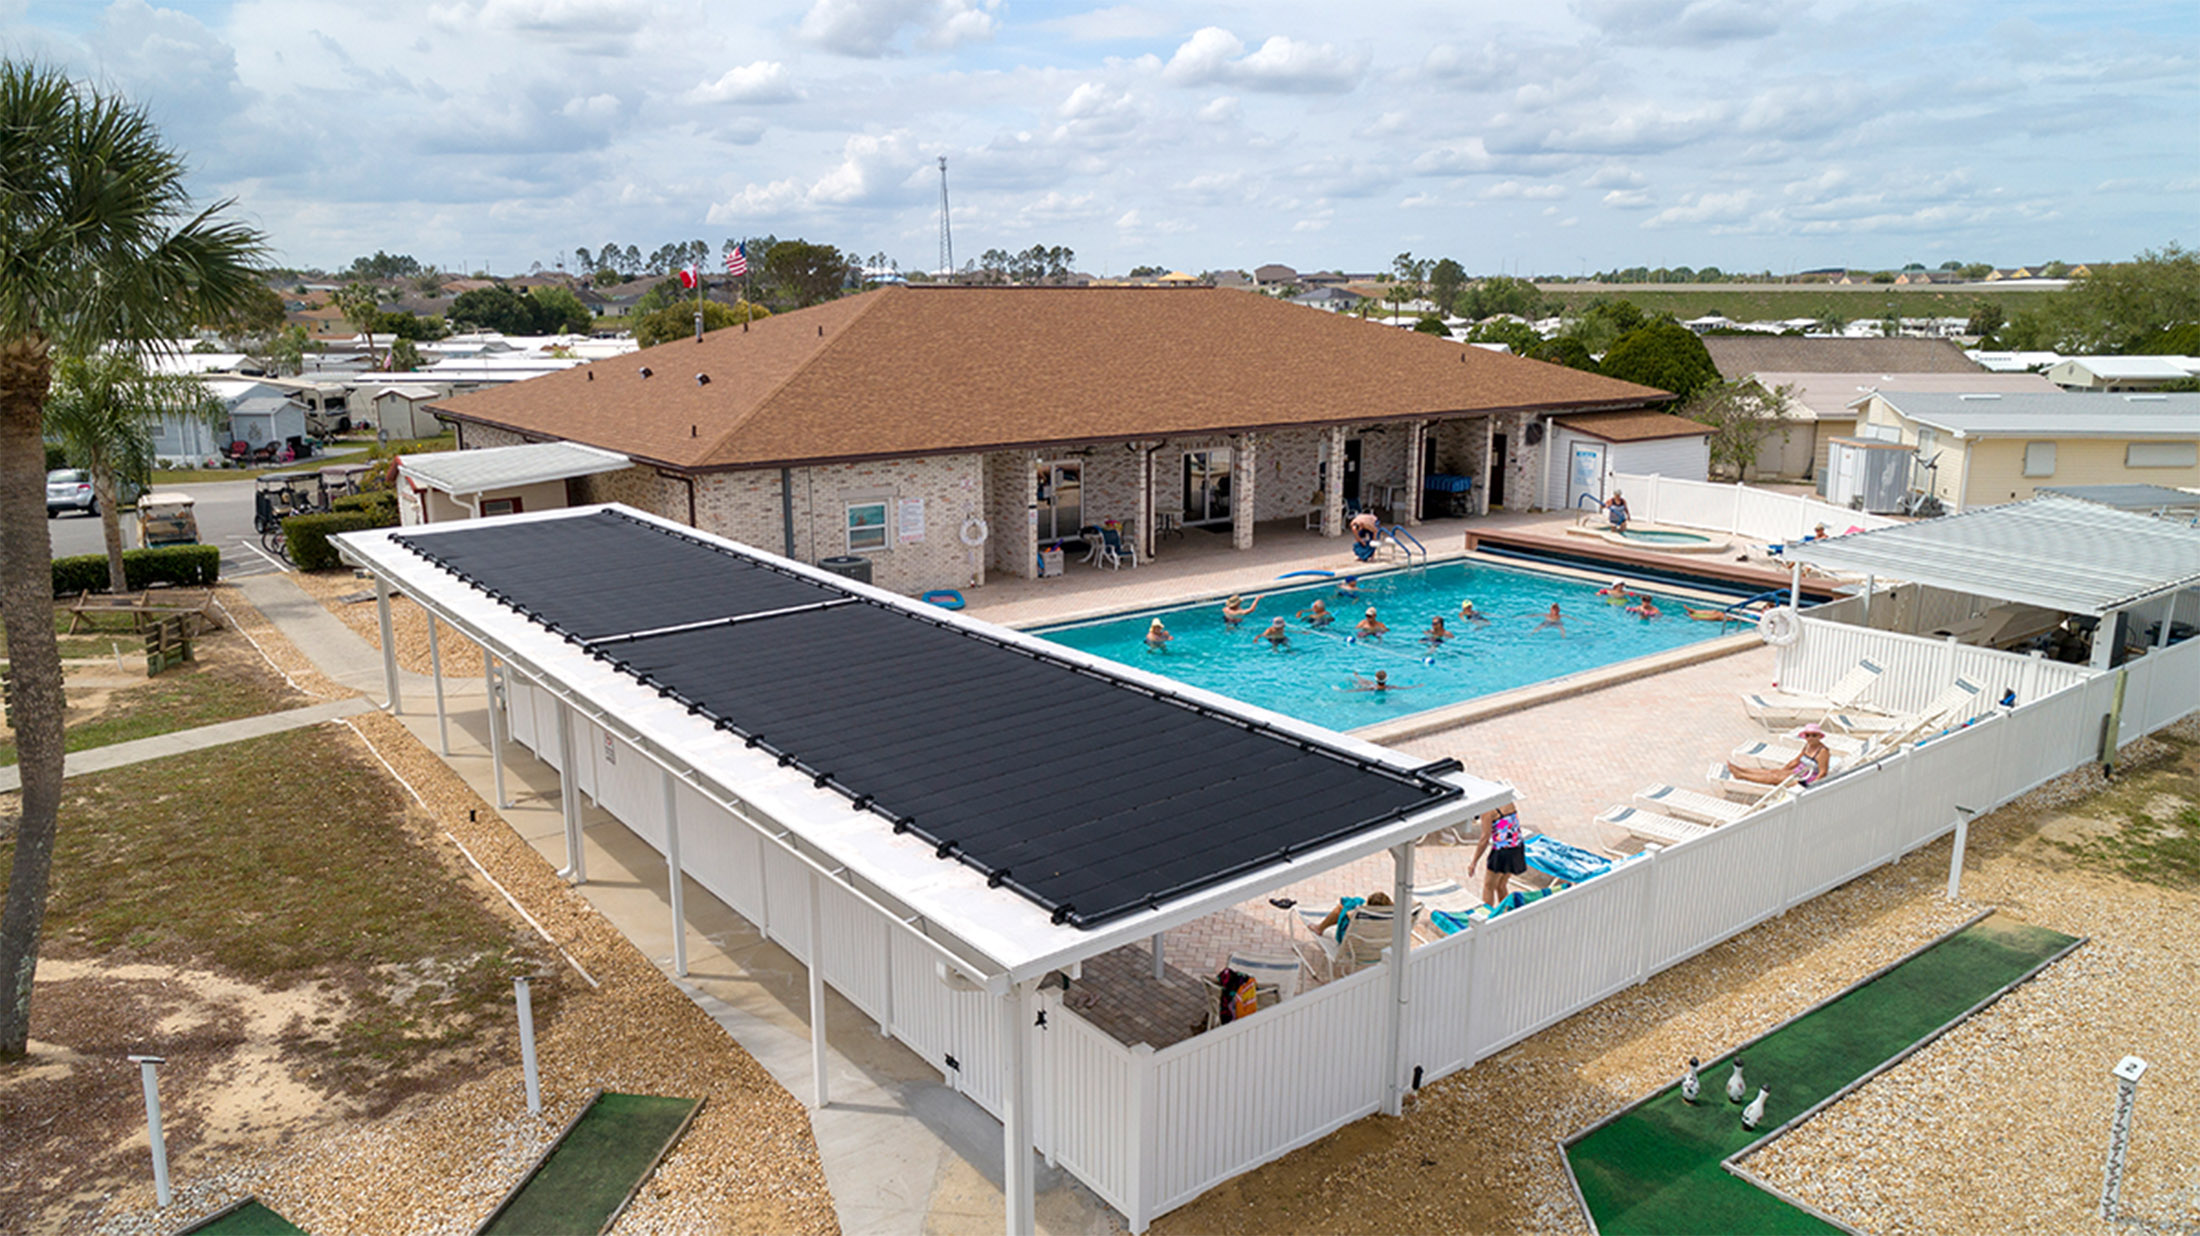 Solar thermal pool heating array array at a community pool makes swimming year-round possible.